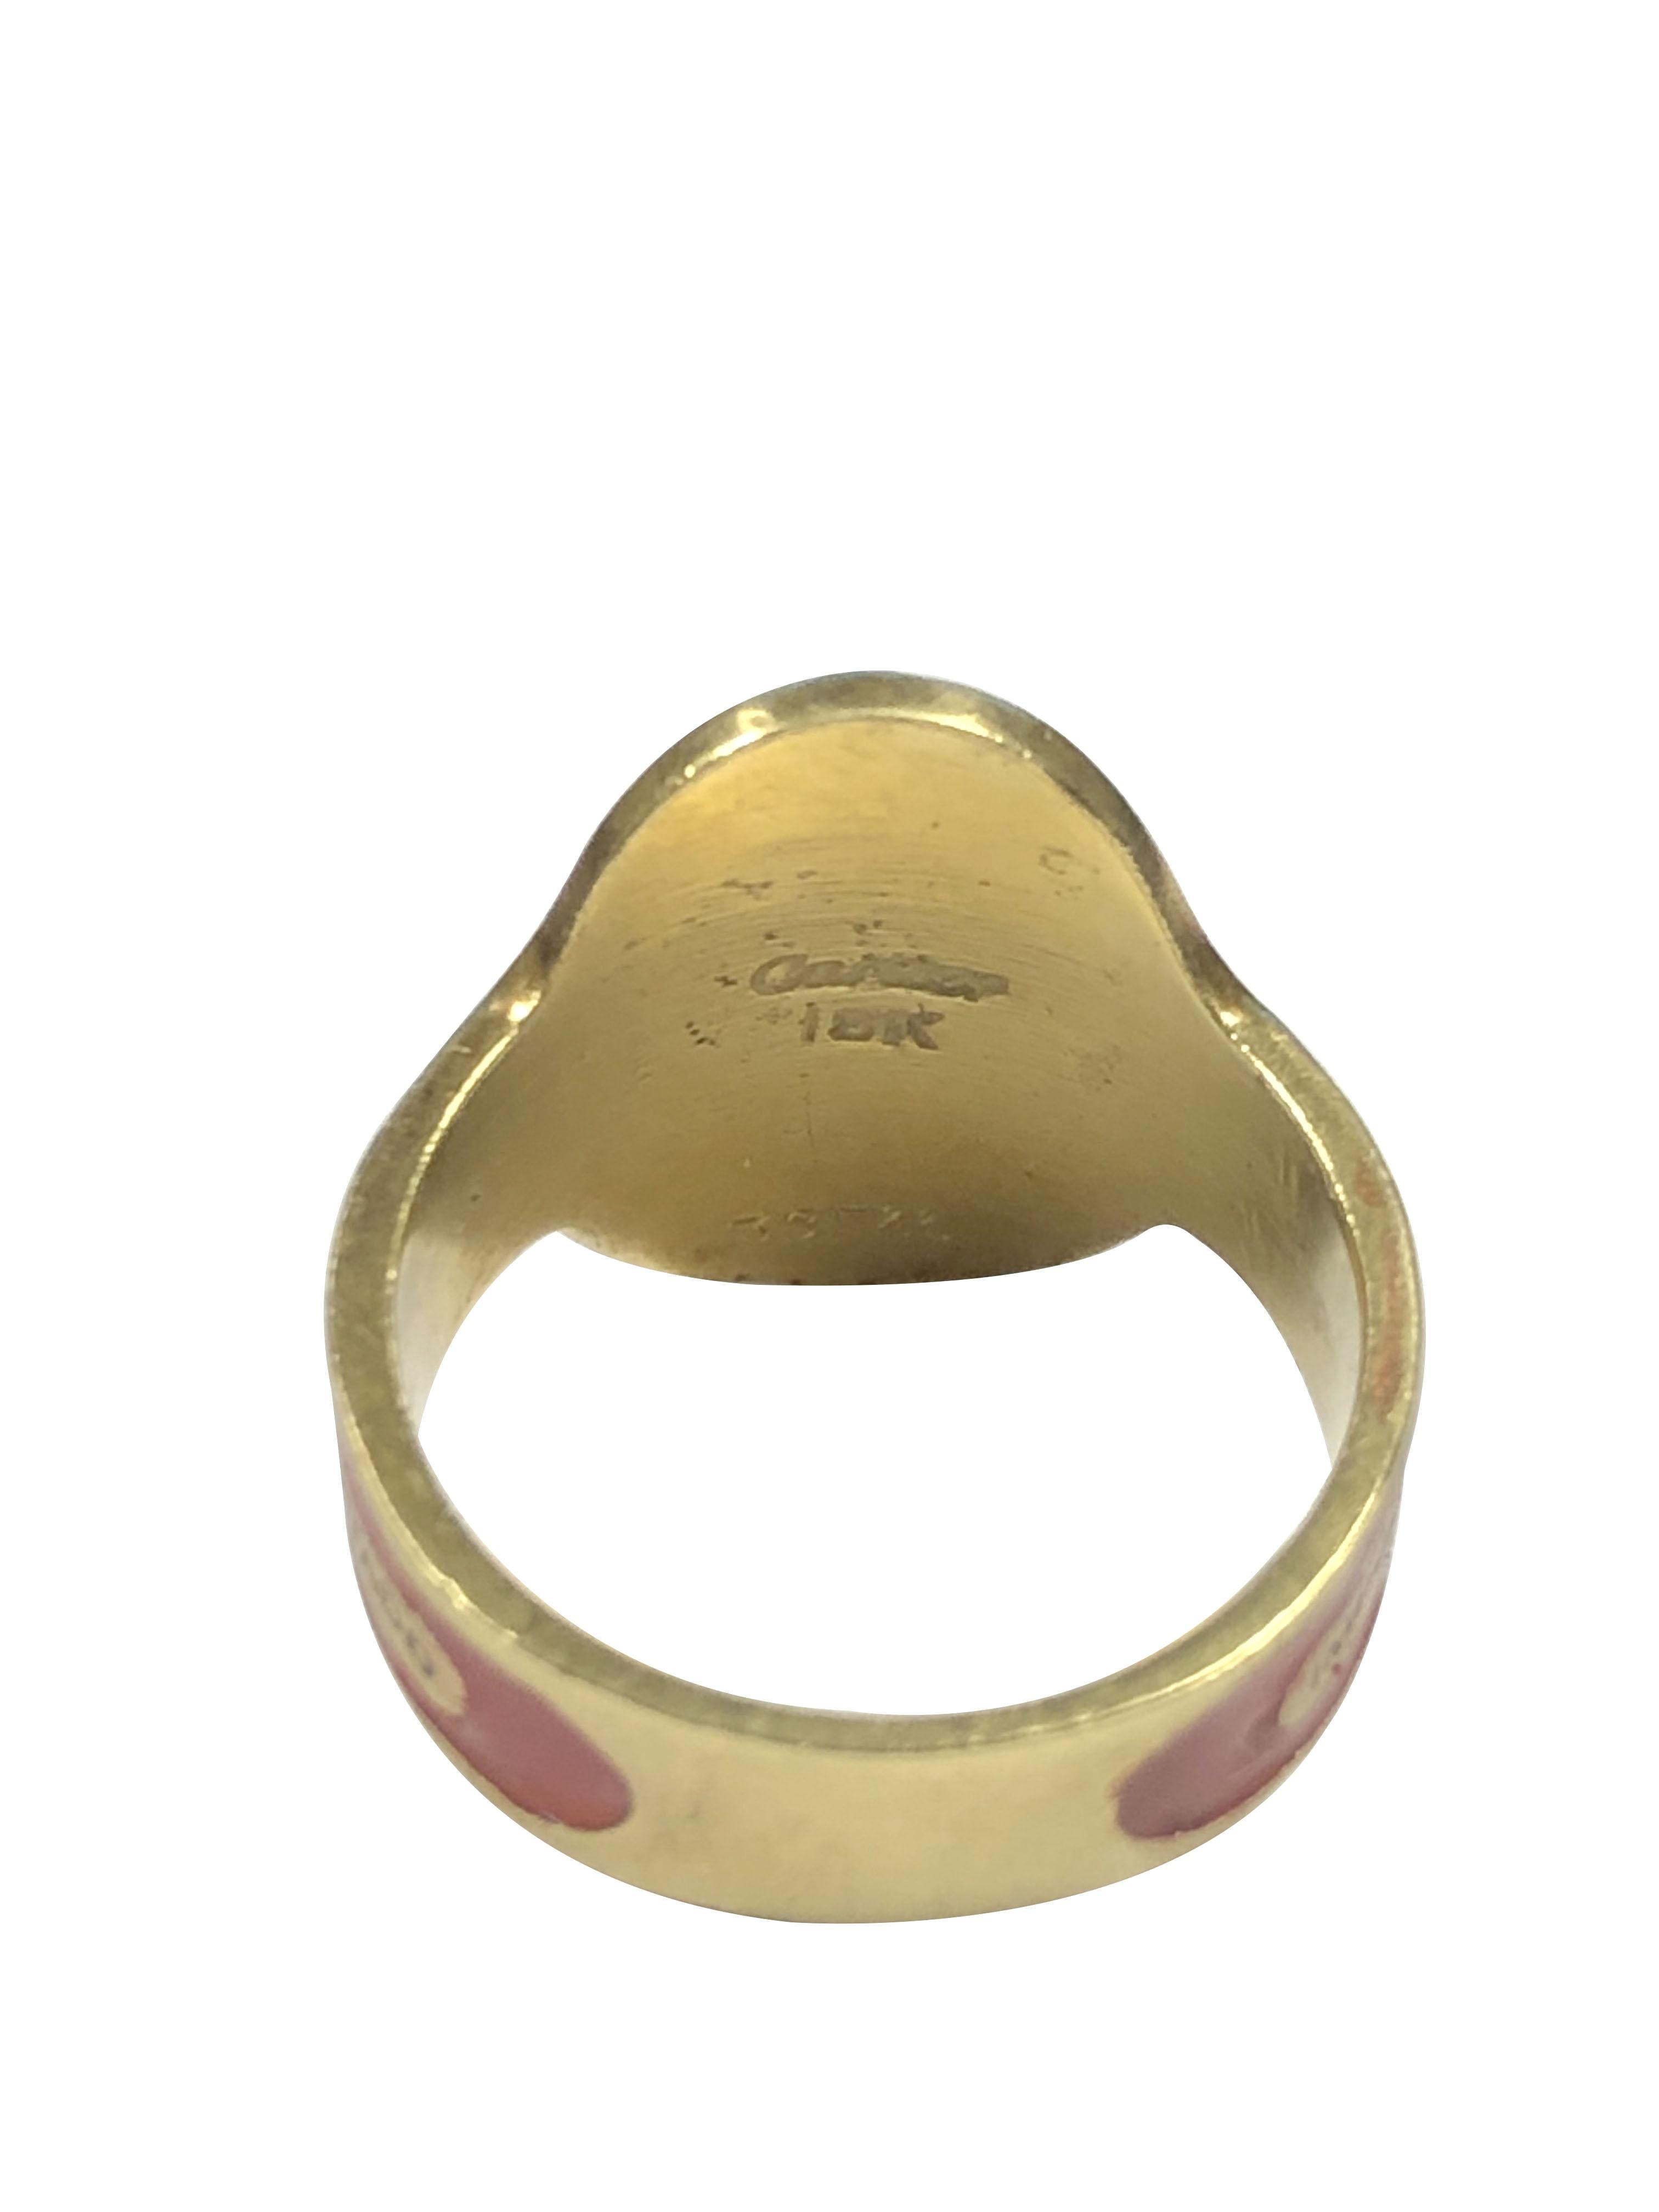 Cartier Vintage Yellow Gold and Enamel Cigar Band Ring 1